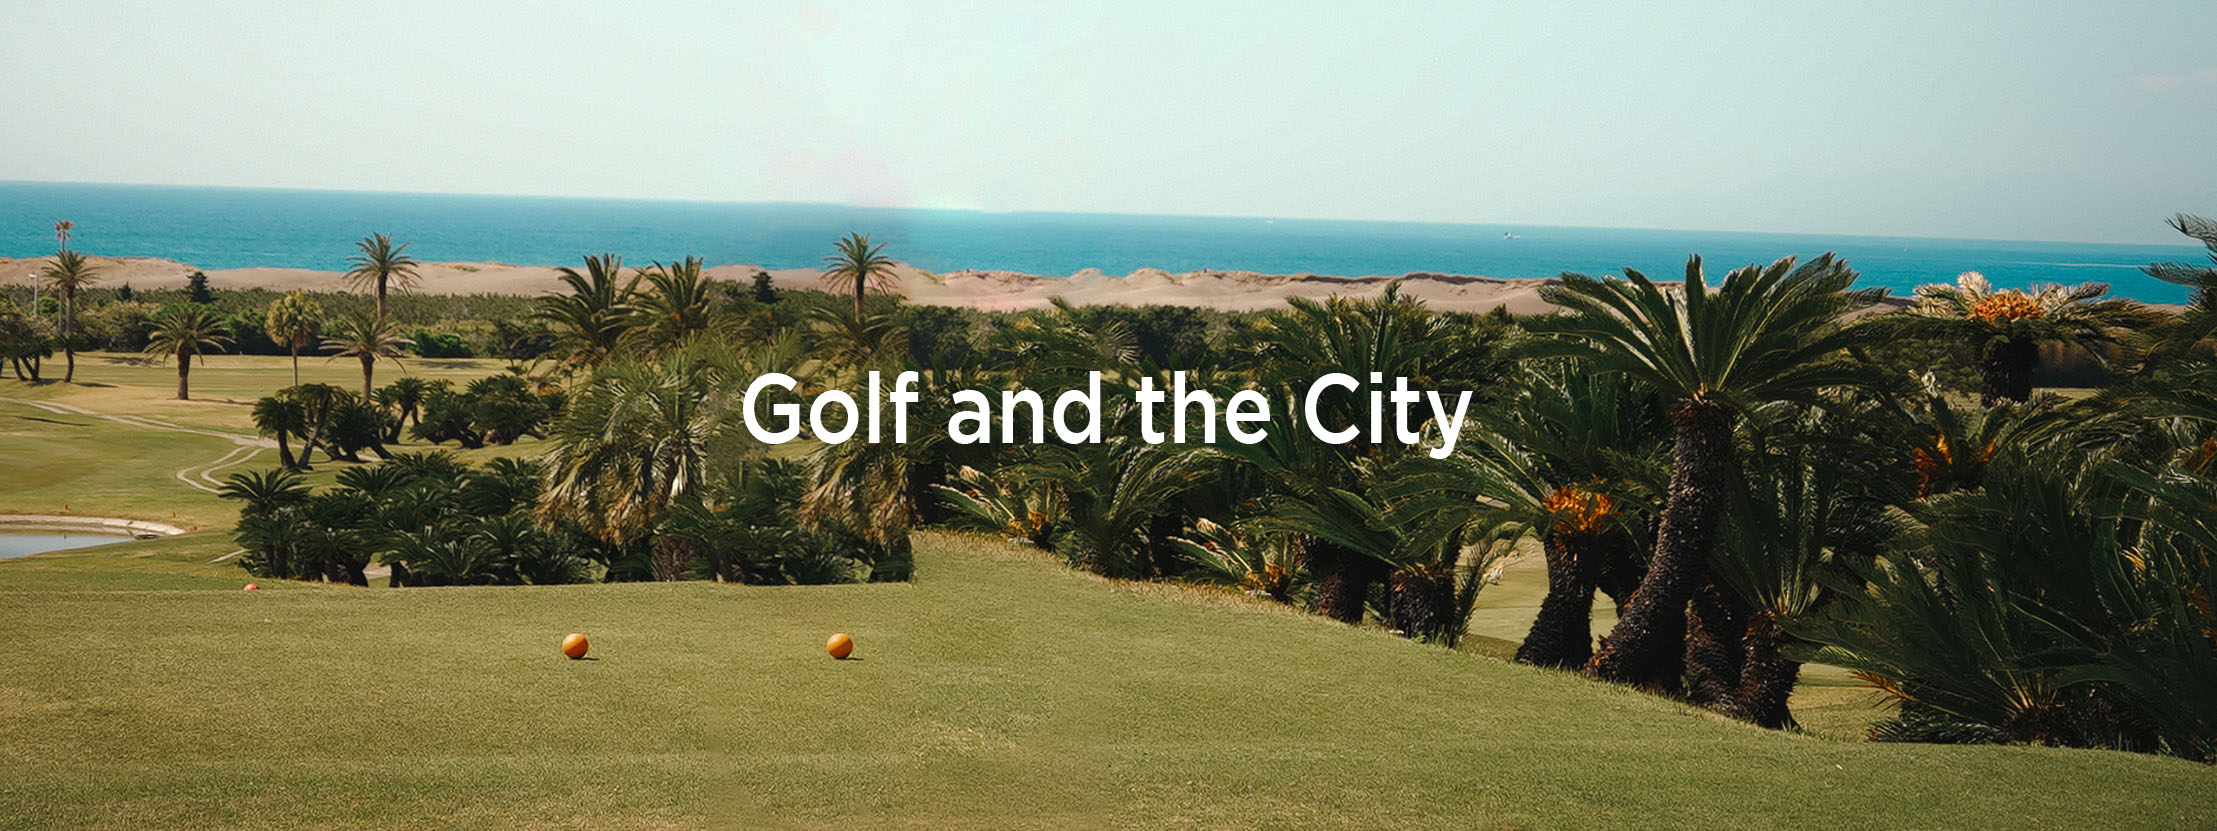 GOLF AND THE CITY